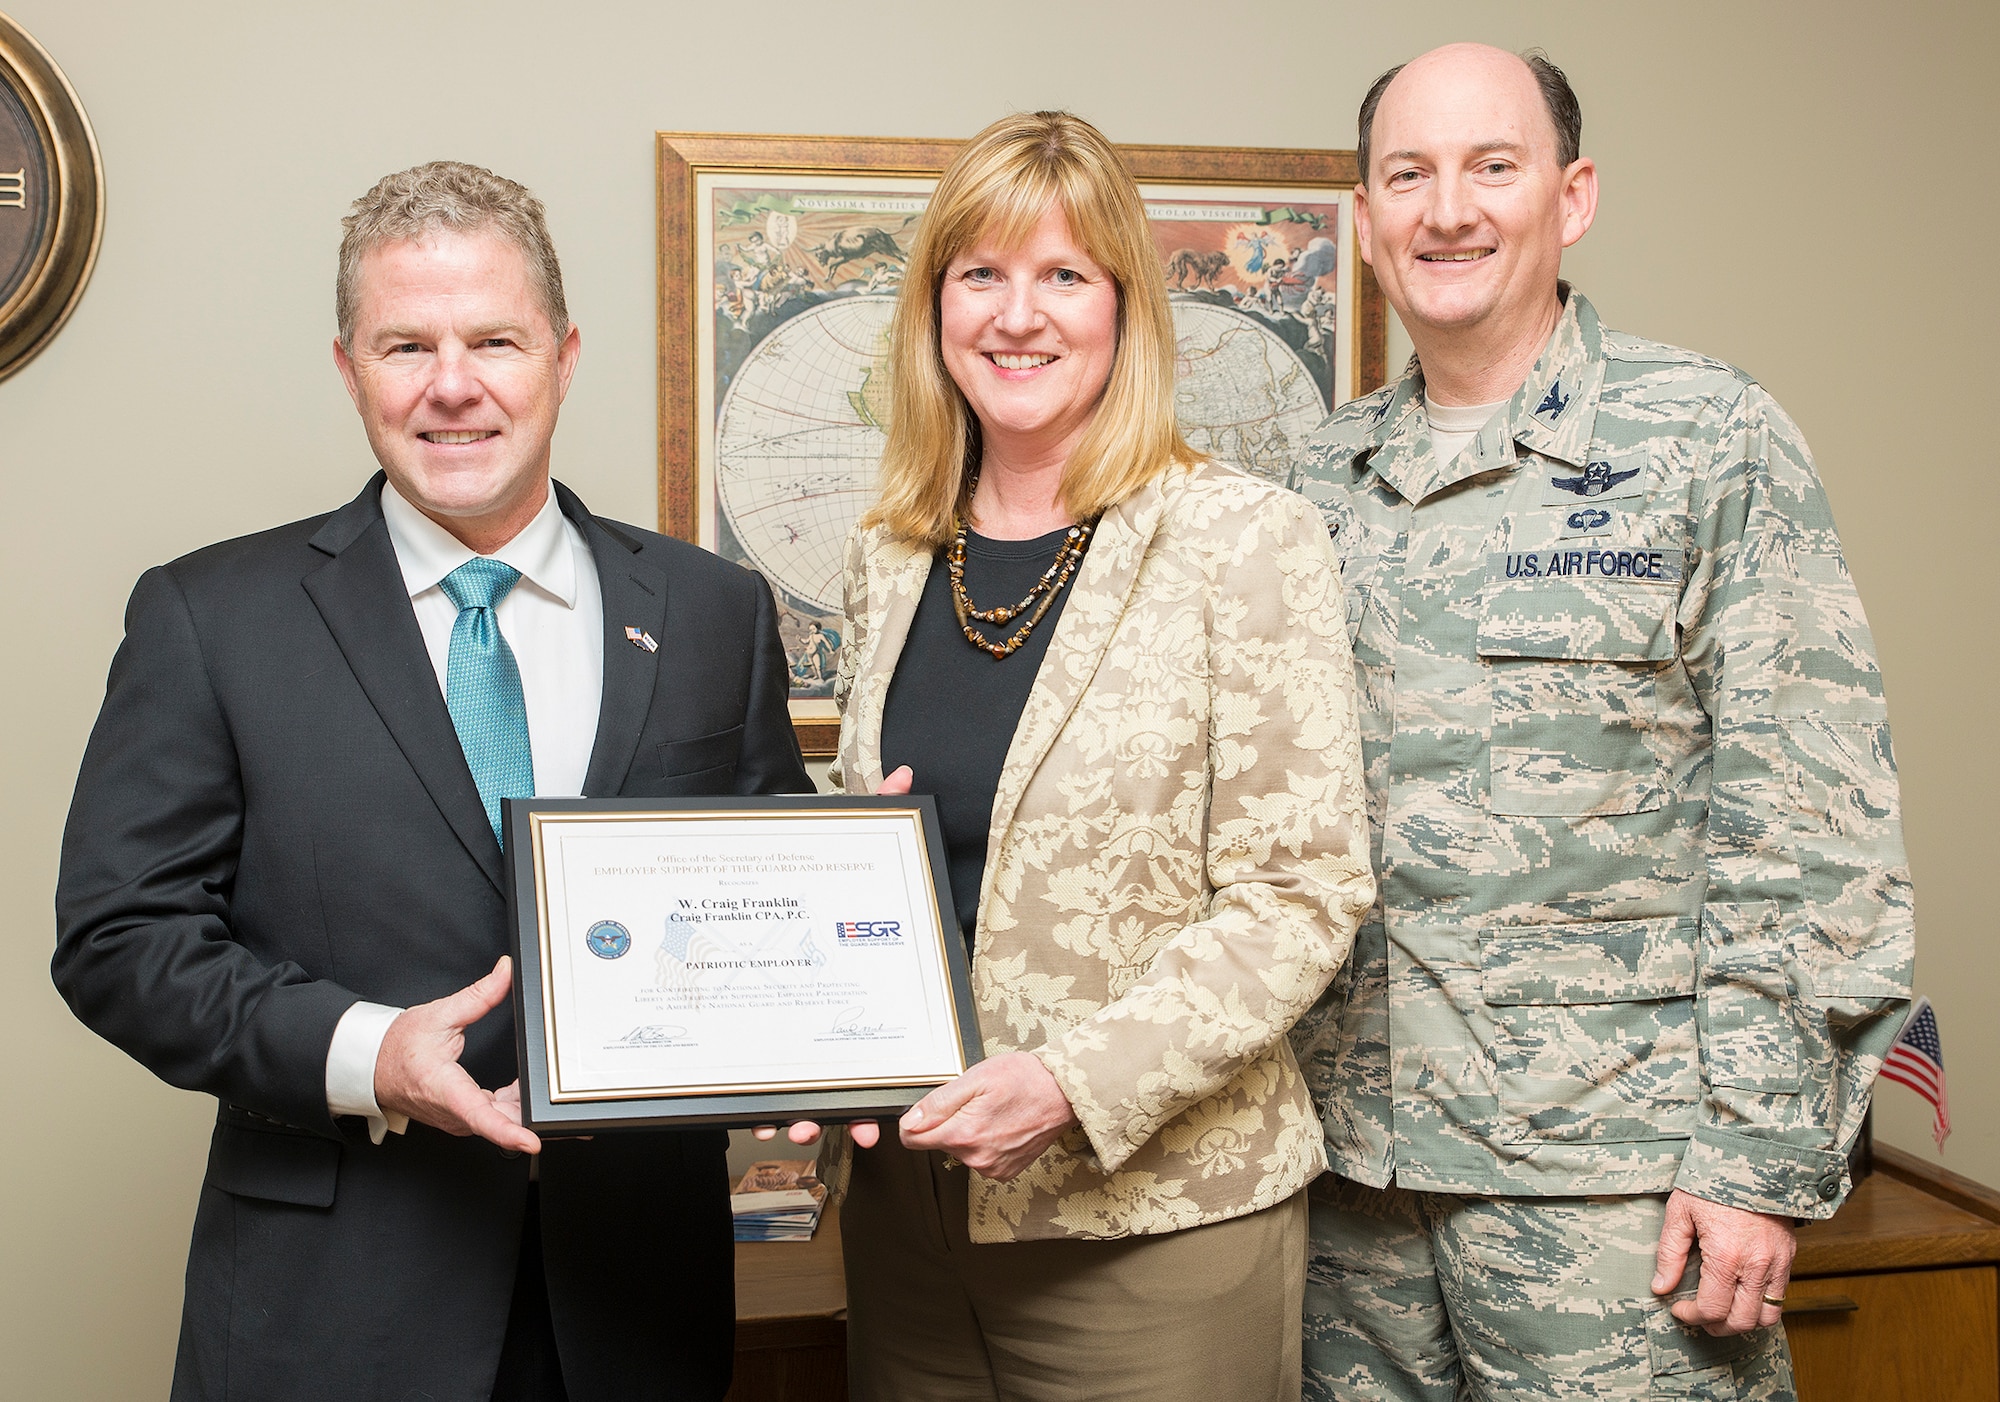 Craig Franklin, Craig Franklin CPA president, receives the Texas Employer Support of the Guard and Reserves’ Patriot Award March 29, 2016. Franklin was nominated by Deborah Smith, a Craig Franklin CPA employee and the spouse of Col. Thomas K. Smith Jr., 433rd Airlift Wing commander.   (U.S. Air Force photo by Benjamin Faske) (released)
